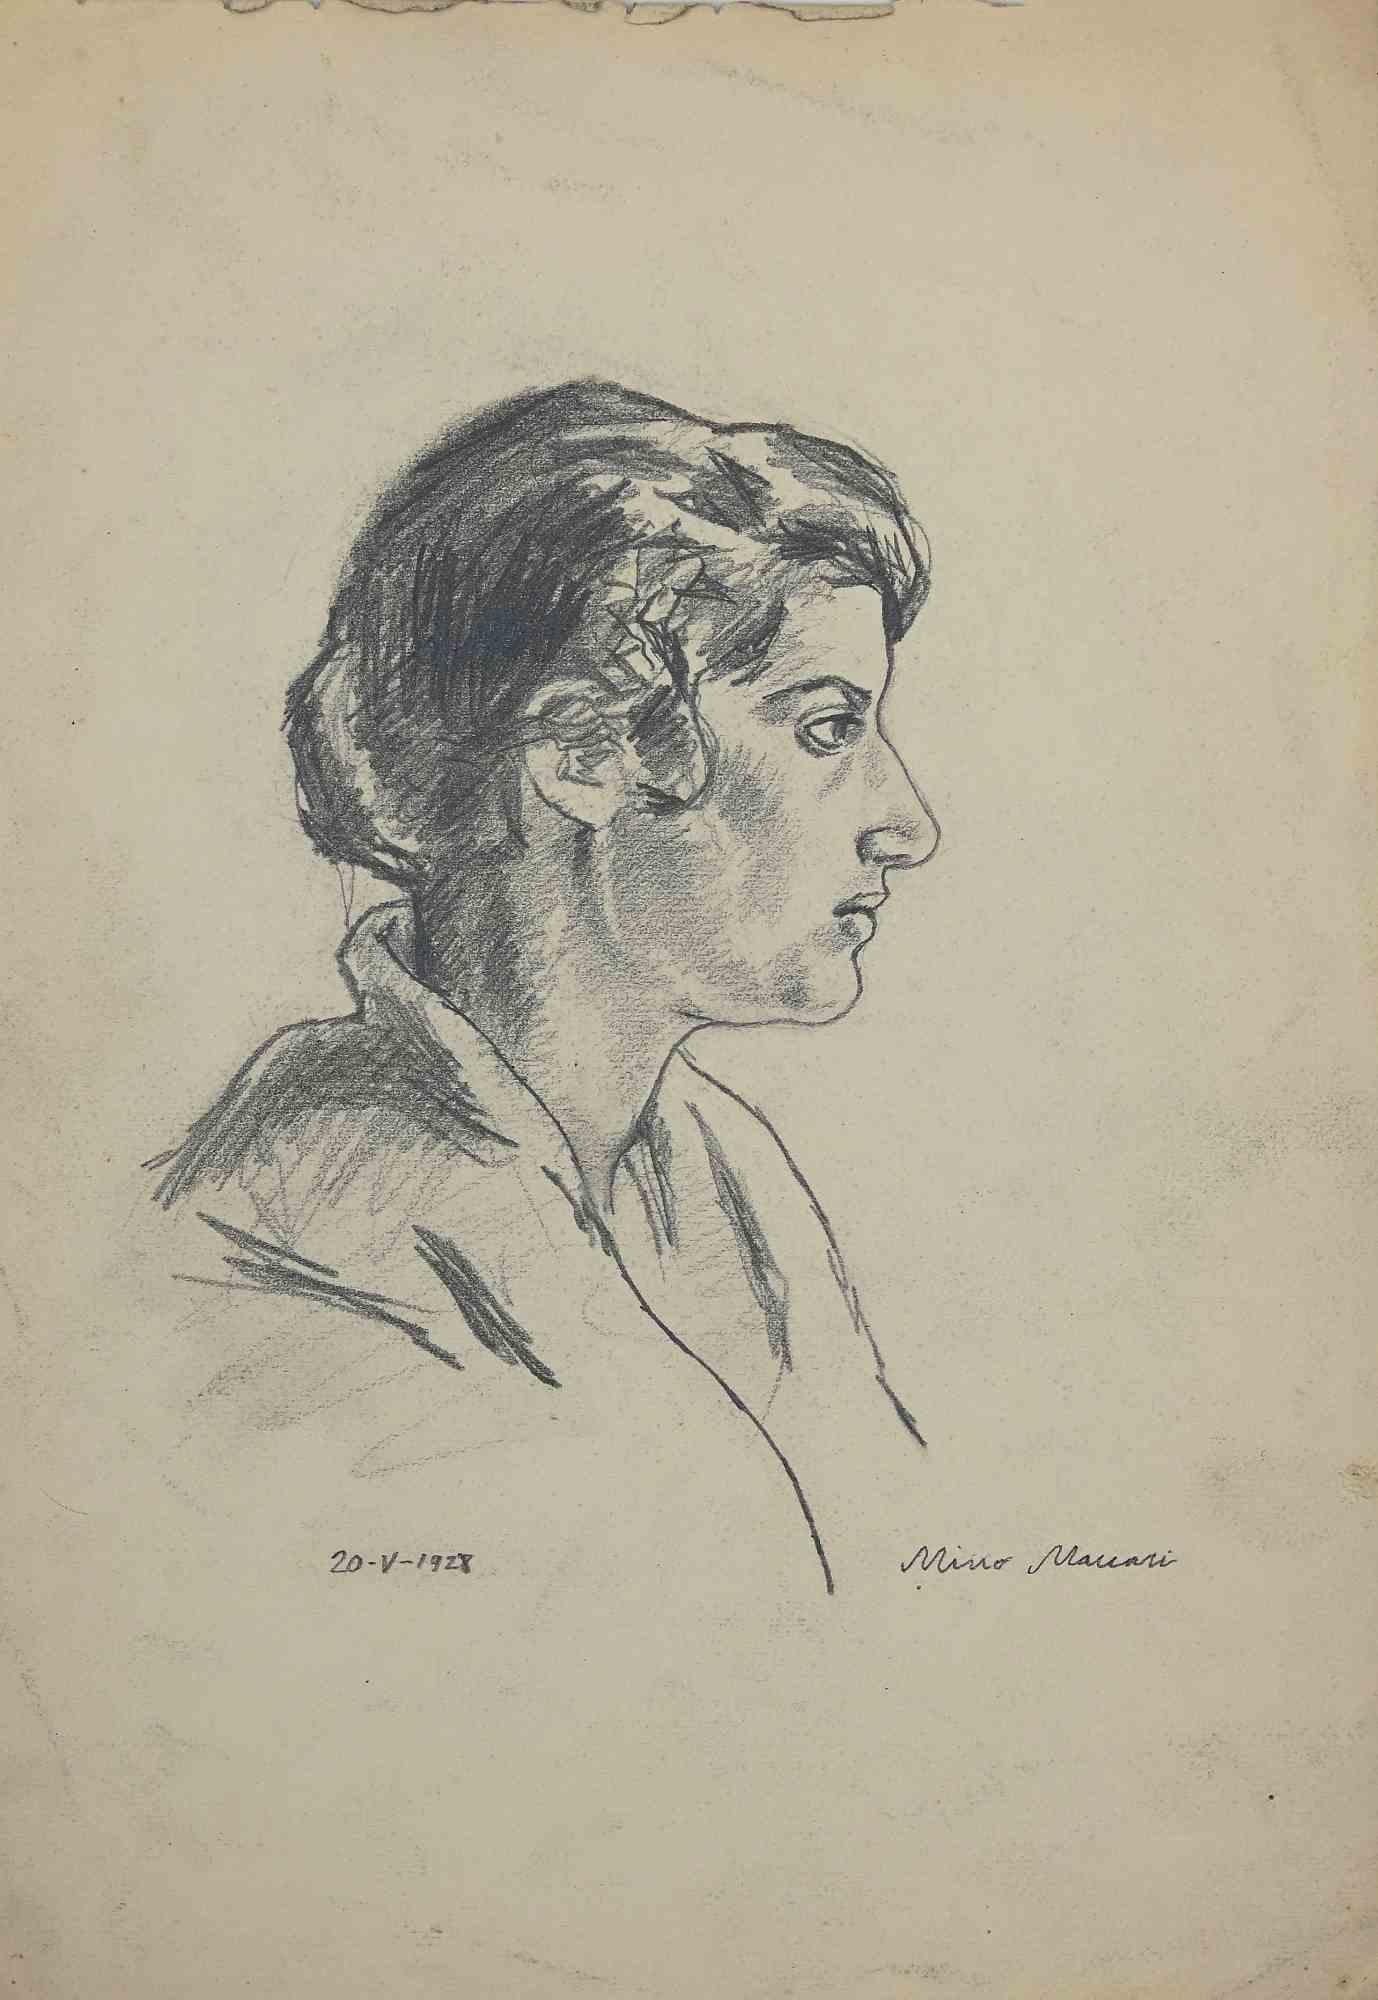 Portrait of Woman is an original Pencil Drawing realized by Mino Maccari in mid-20th century.

Good condition on a yellowed paper.

Hand-signed by the artist with pencil.

Mino Maccari (1898-1989) was an Italian writer, painter, engraver and